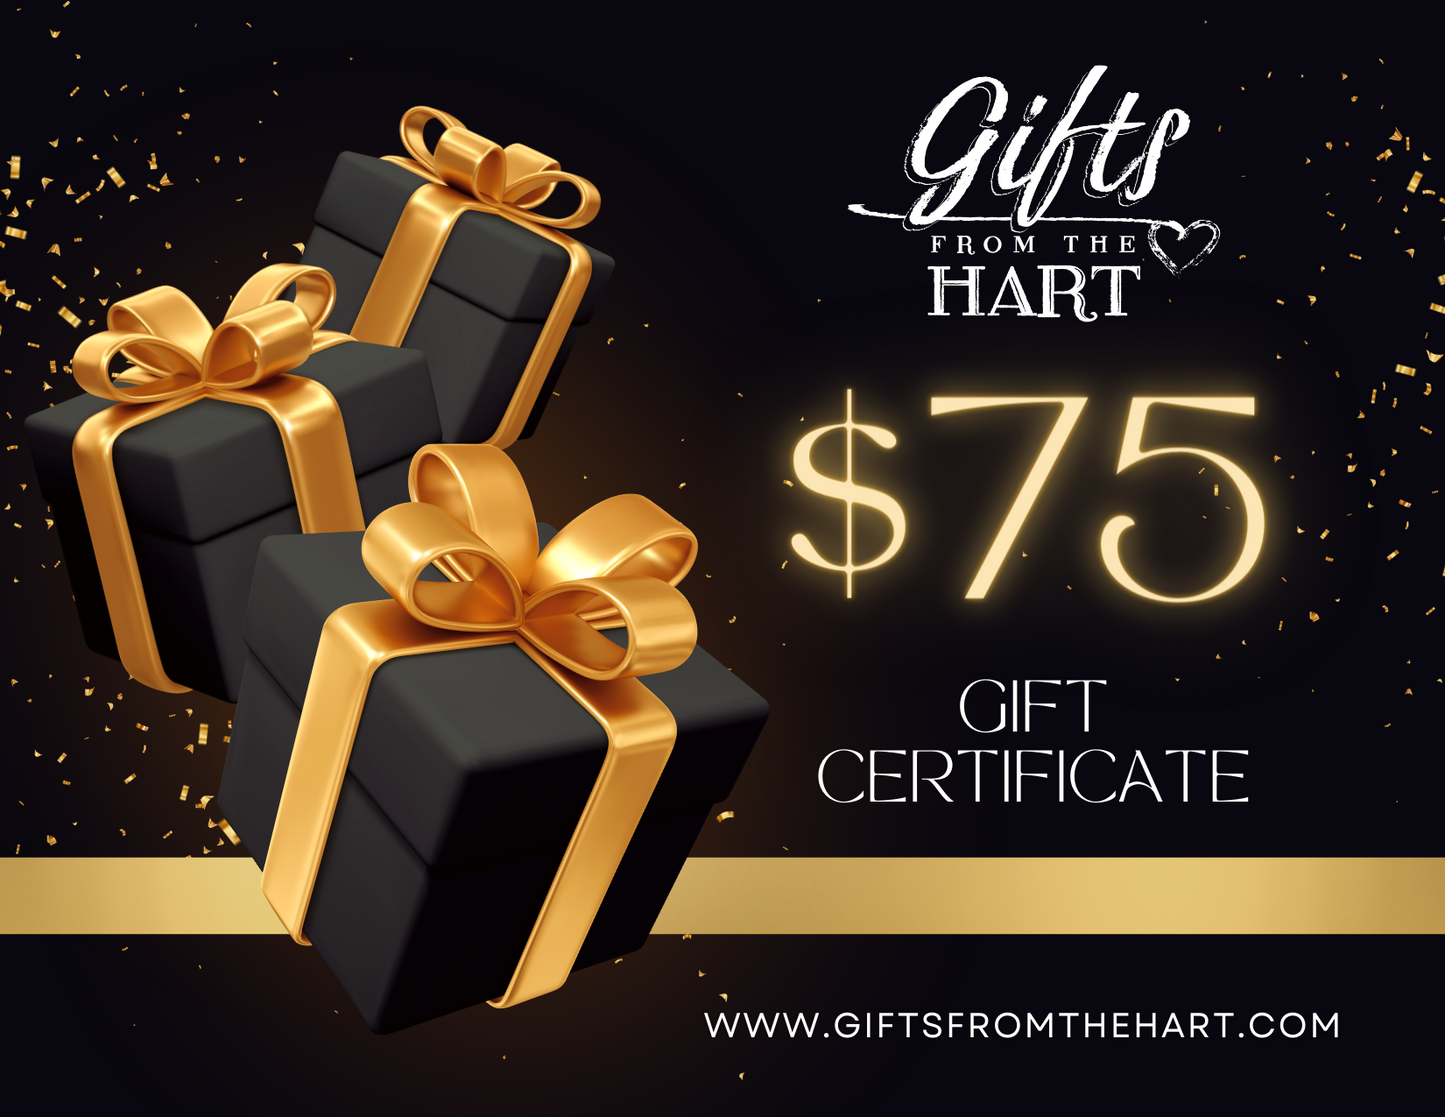 Gifts From the Hart Gift Certificate